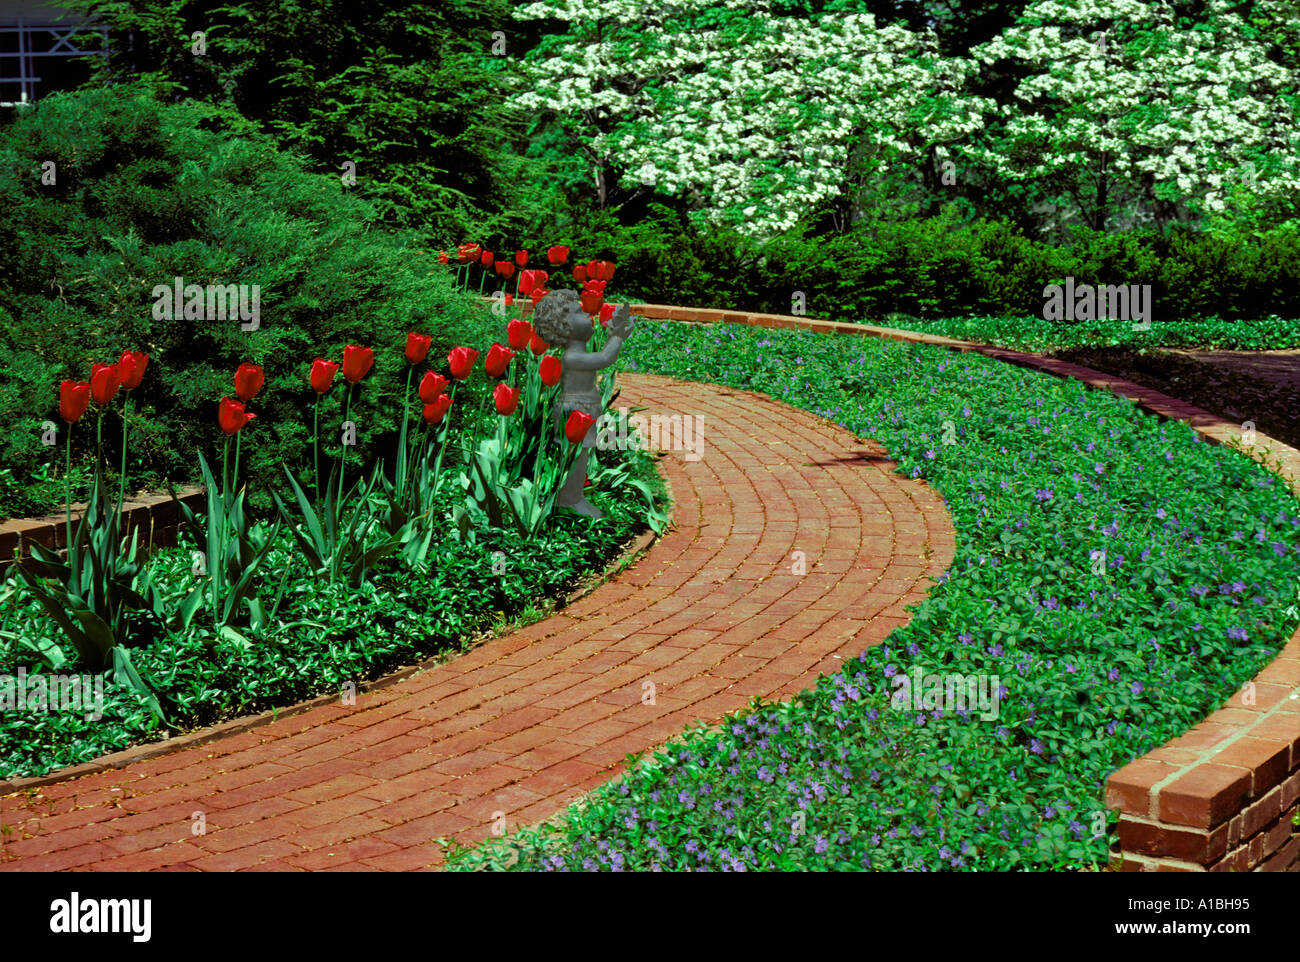 Garden with curving brick path or walkway through vinca groundcover and blooming dogwood trees Stock Photo